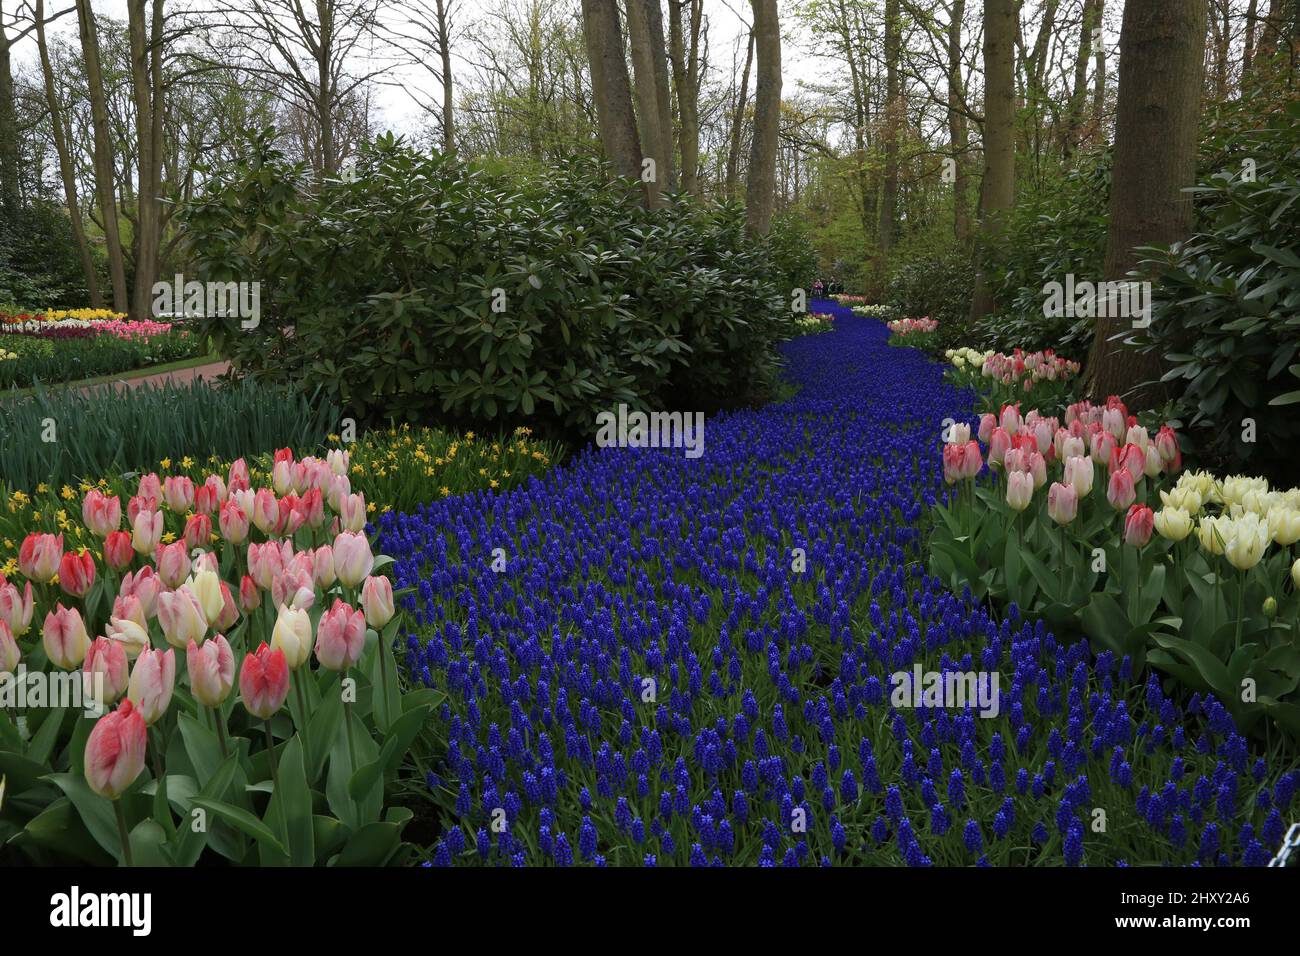 Flowers in bloom during the 63rd Annual Spring Opening of the Keukenhof Flower Park at the Keukenhof in The Netherlands. Stock Photo